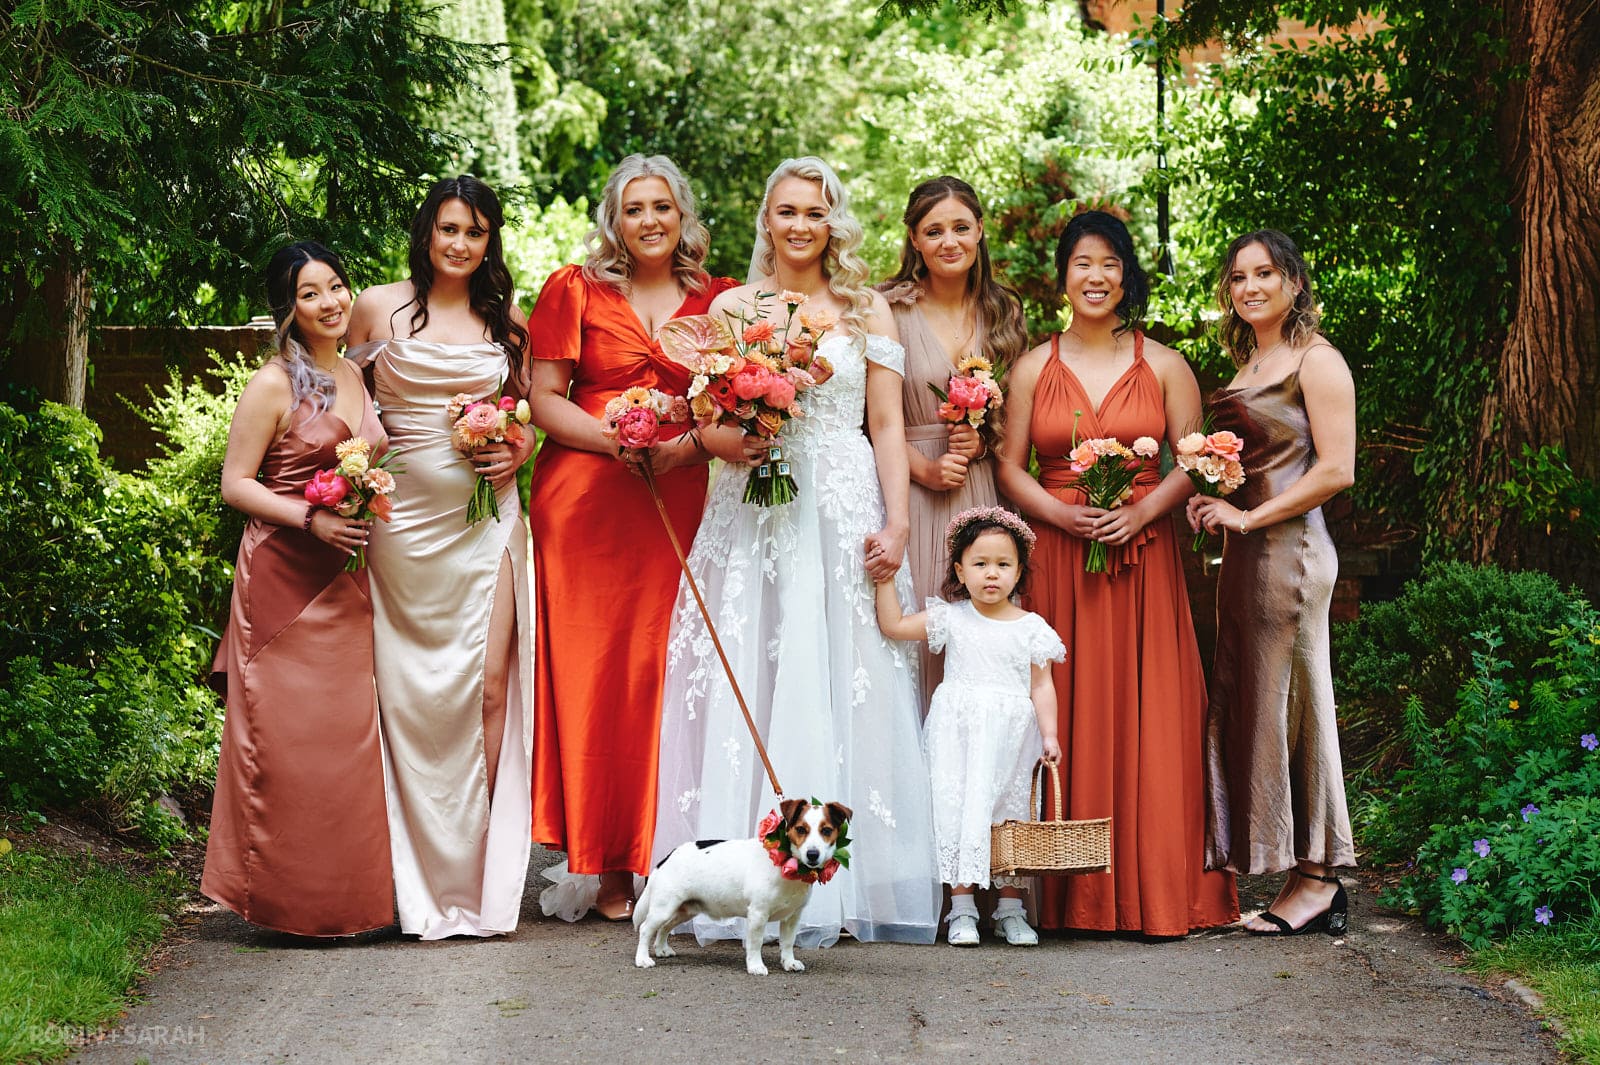 Bride and bridesmaids pose for photo.